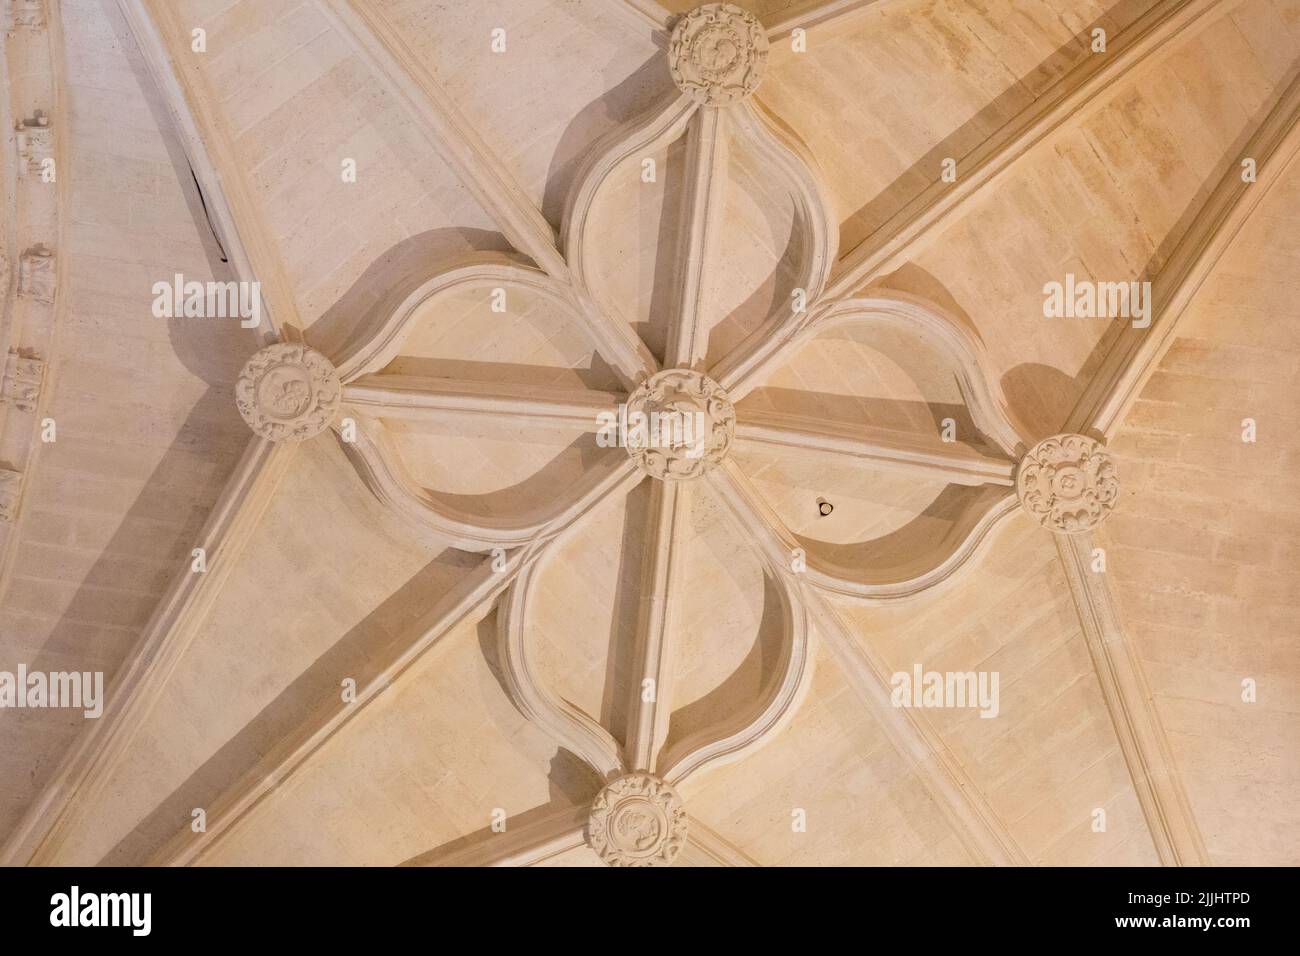 Interior cathedral of Burgos, Castilla, Spain, details of architecture, sculpture and altarpieces. Stock Photo